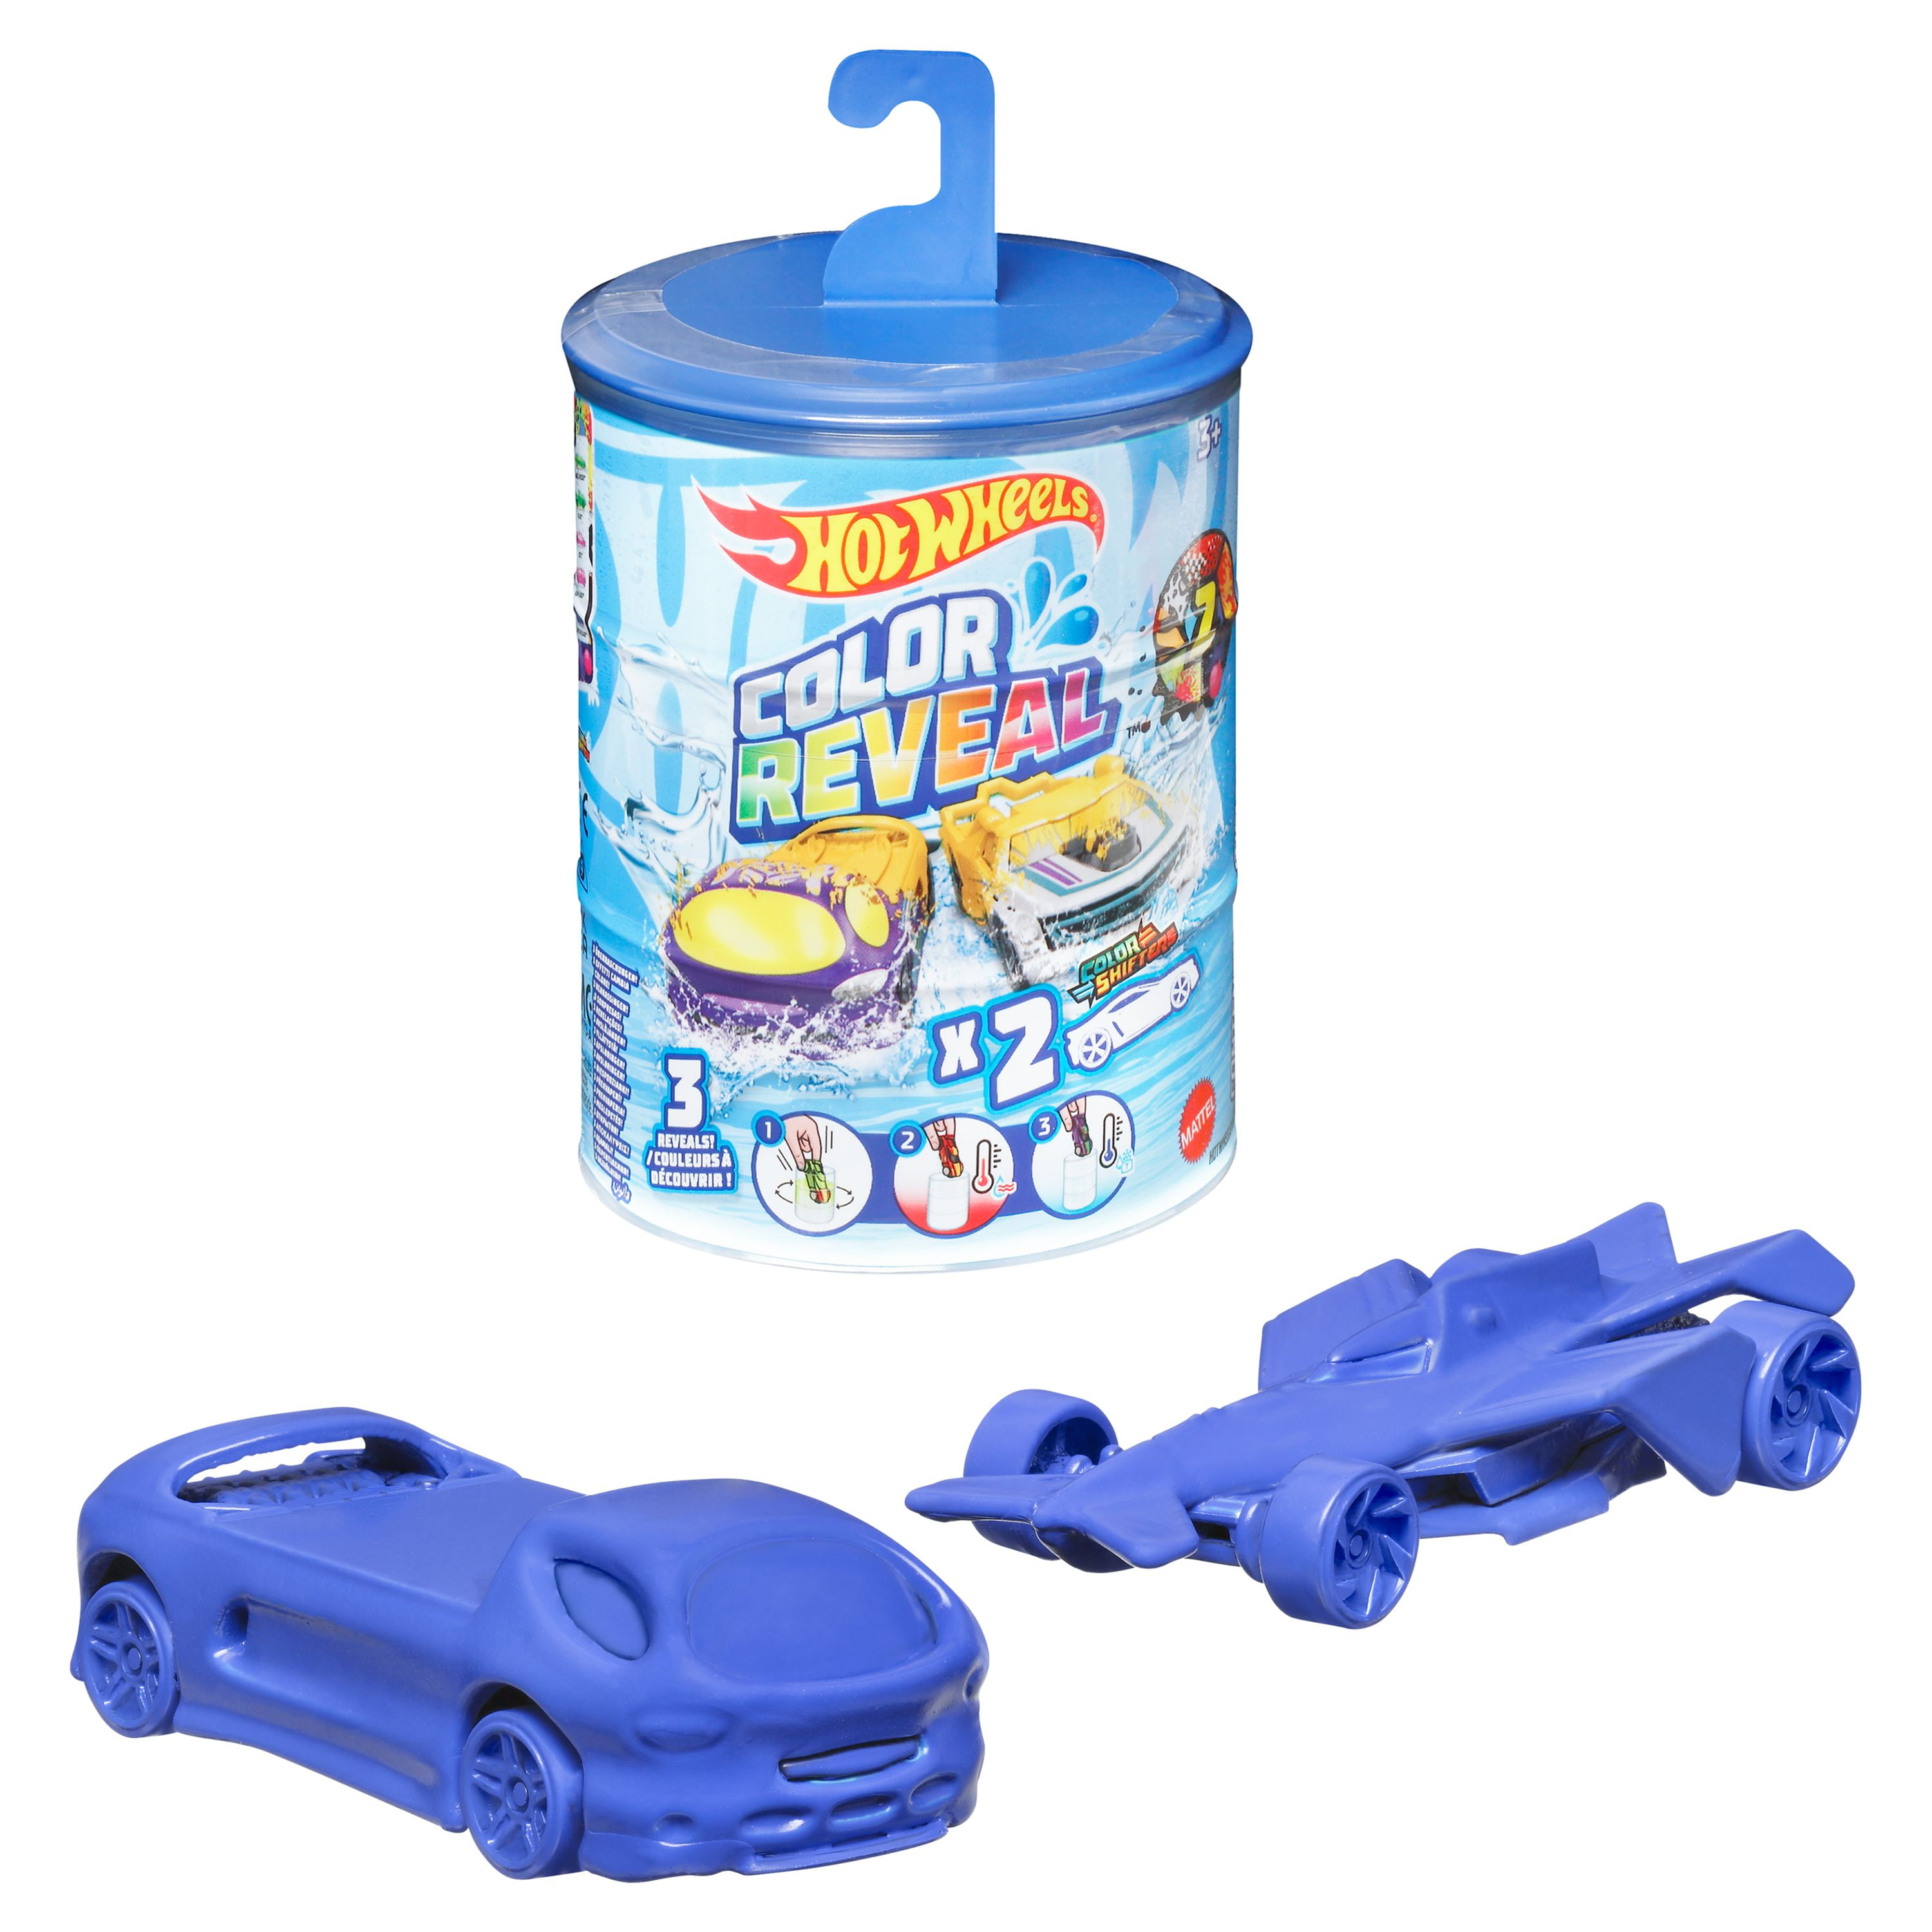 Toy Hot Wheels - Color Reveal 2-pack, Posters, Gifts, Merchandise